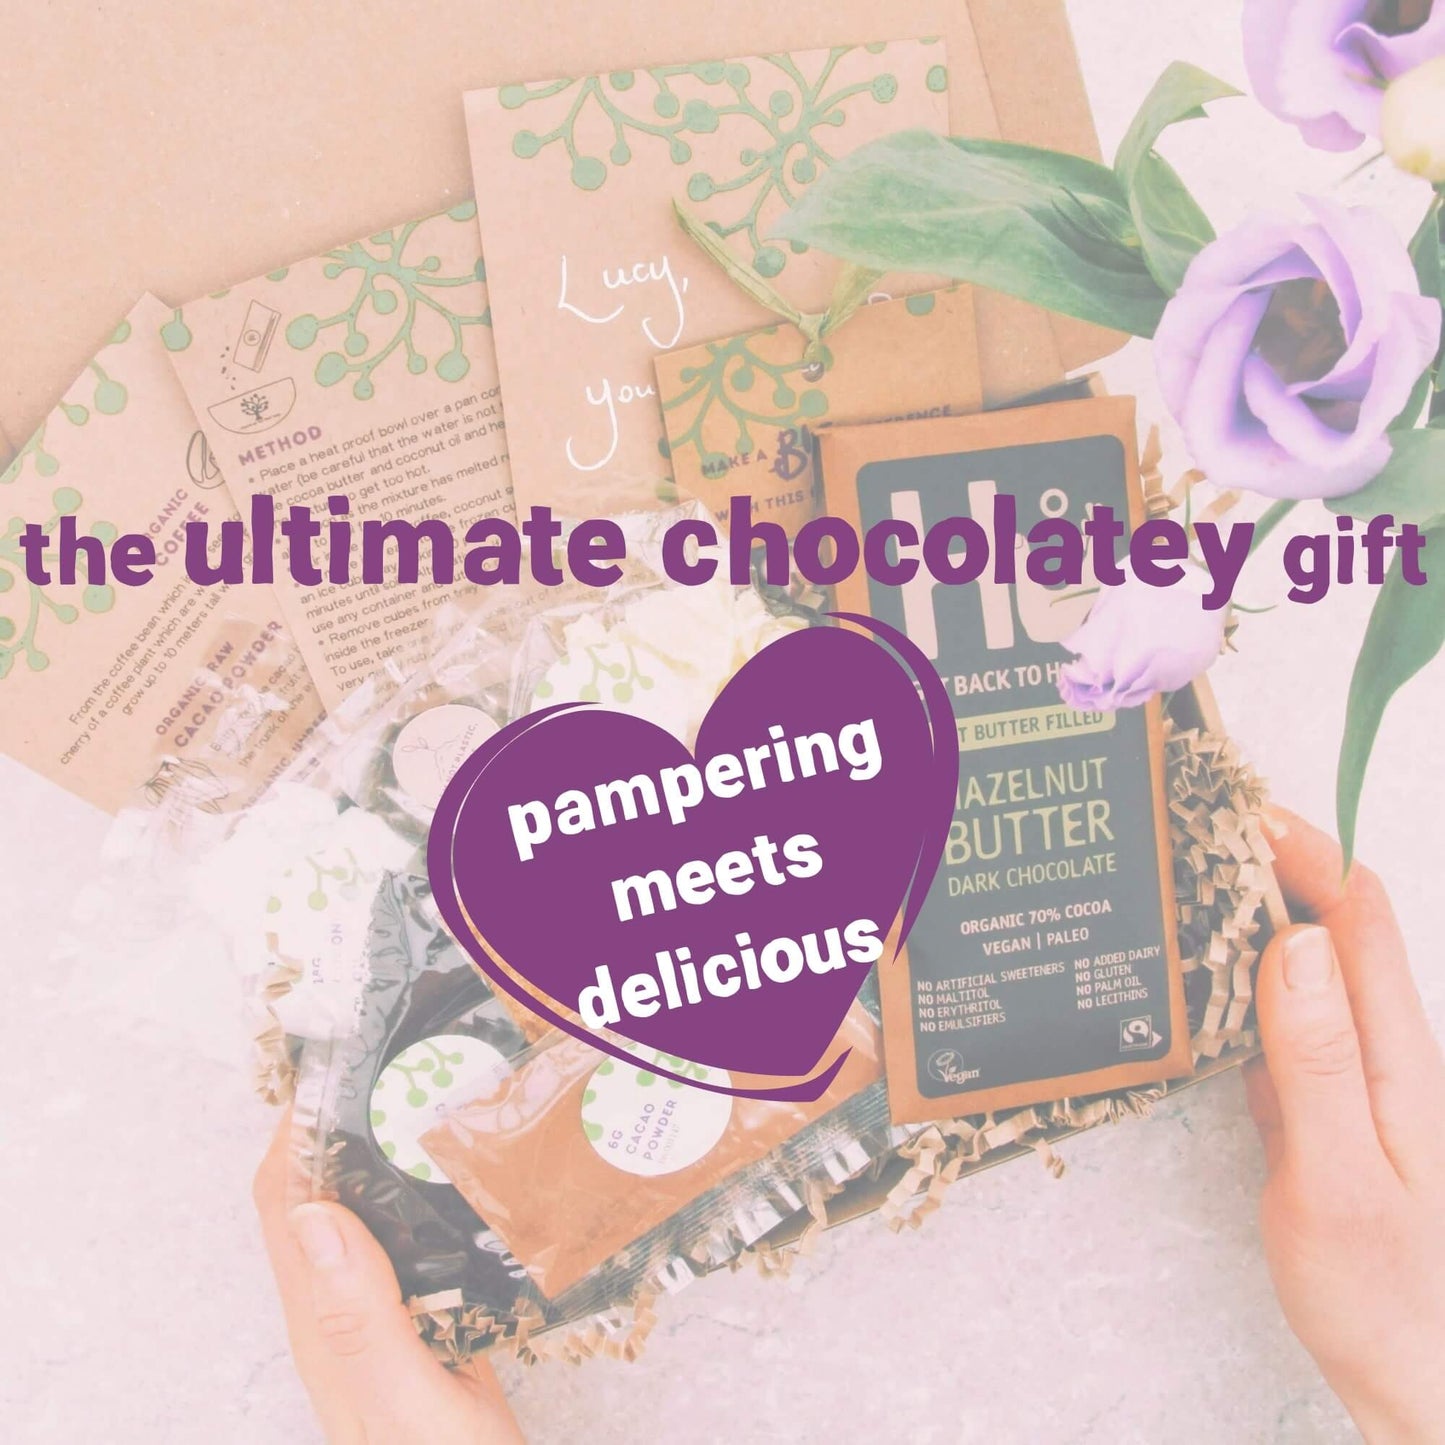 eco-friendly pampering and chocolate inside letterbox gift box